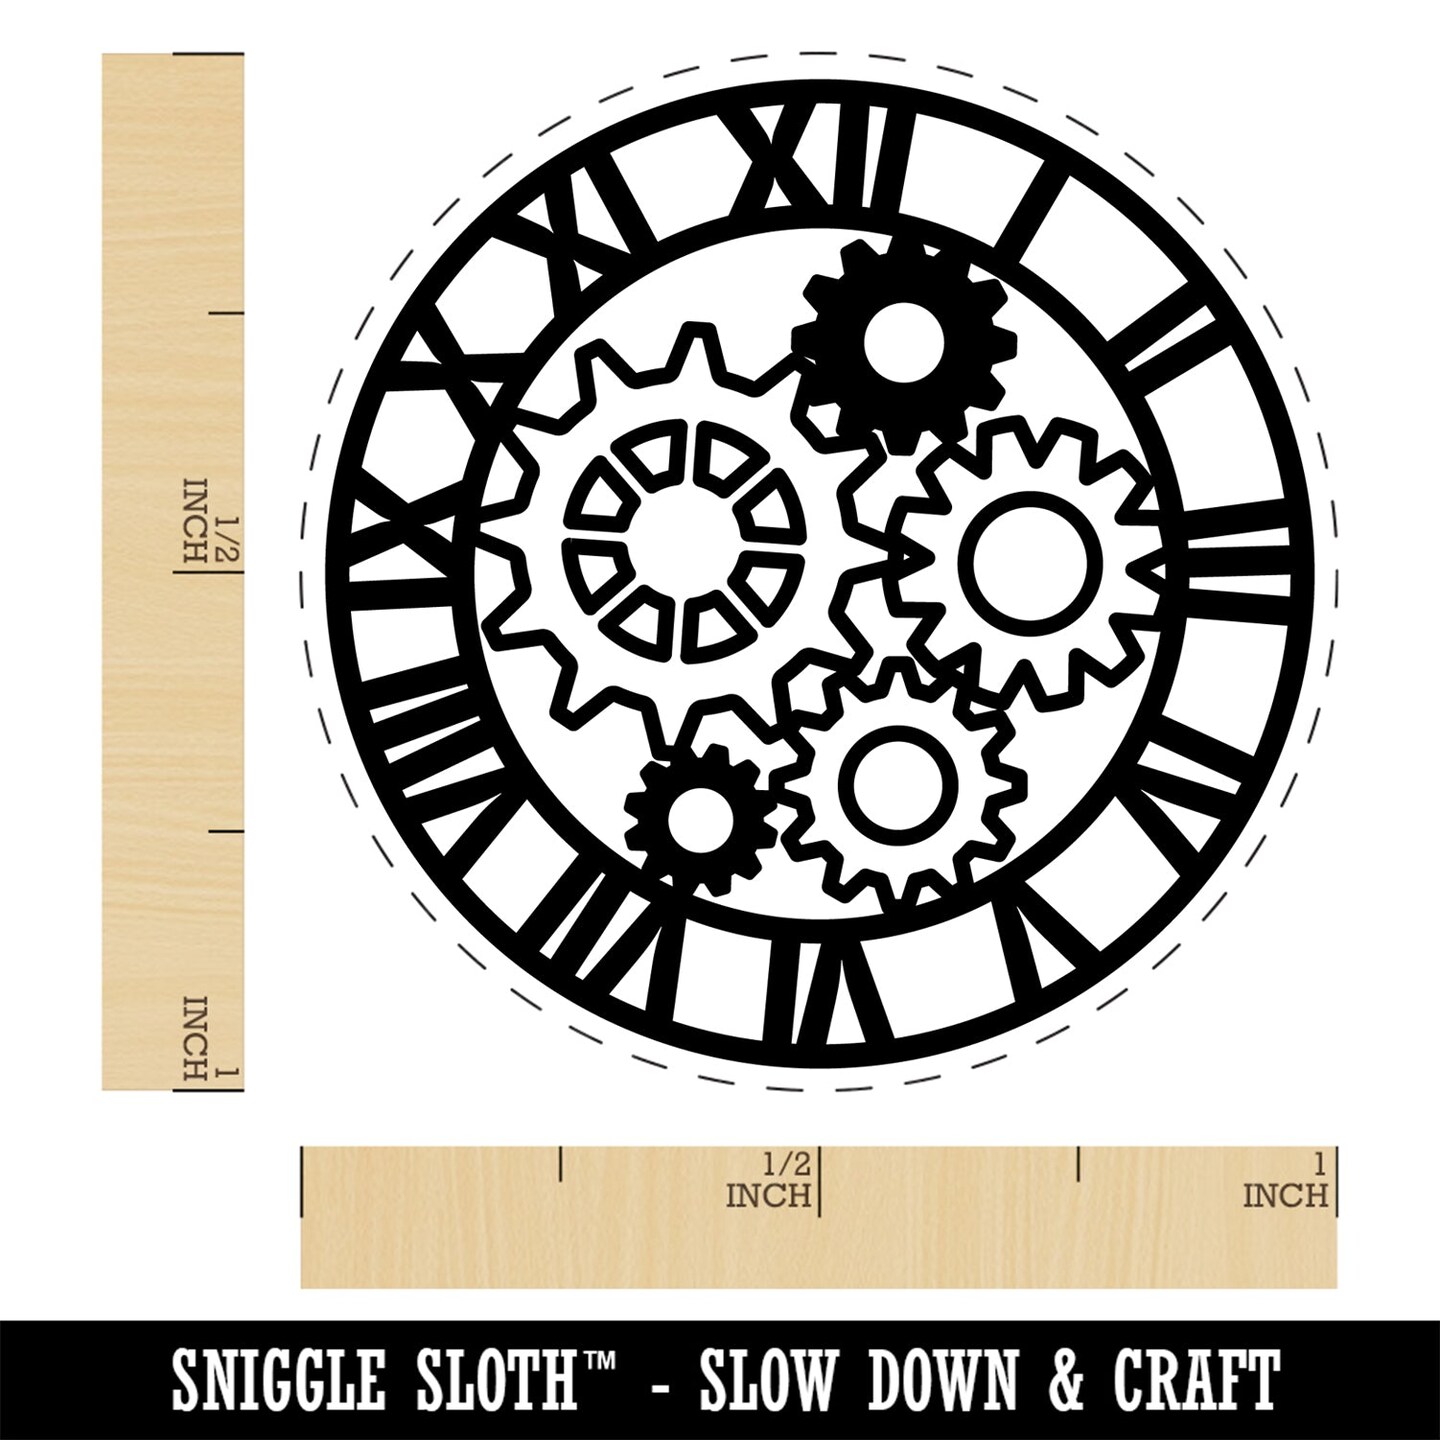 Clock Face with Gears Self-Inking Rubber Stamp Ink Stamper for Stamping Crafting Planners